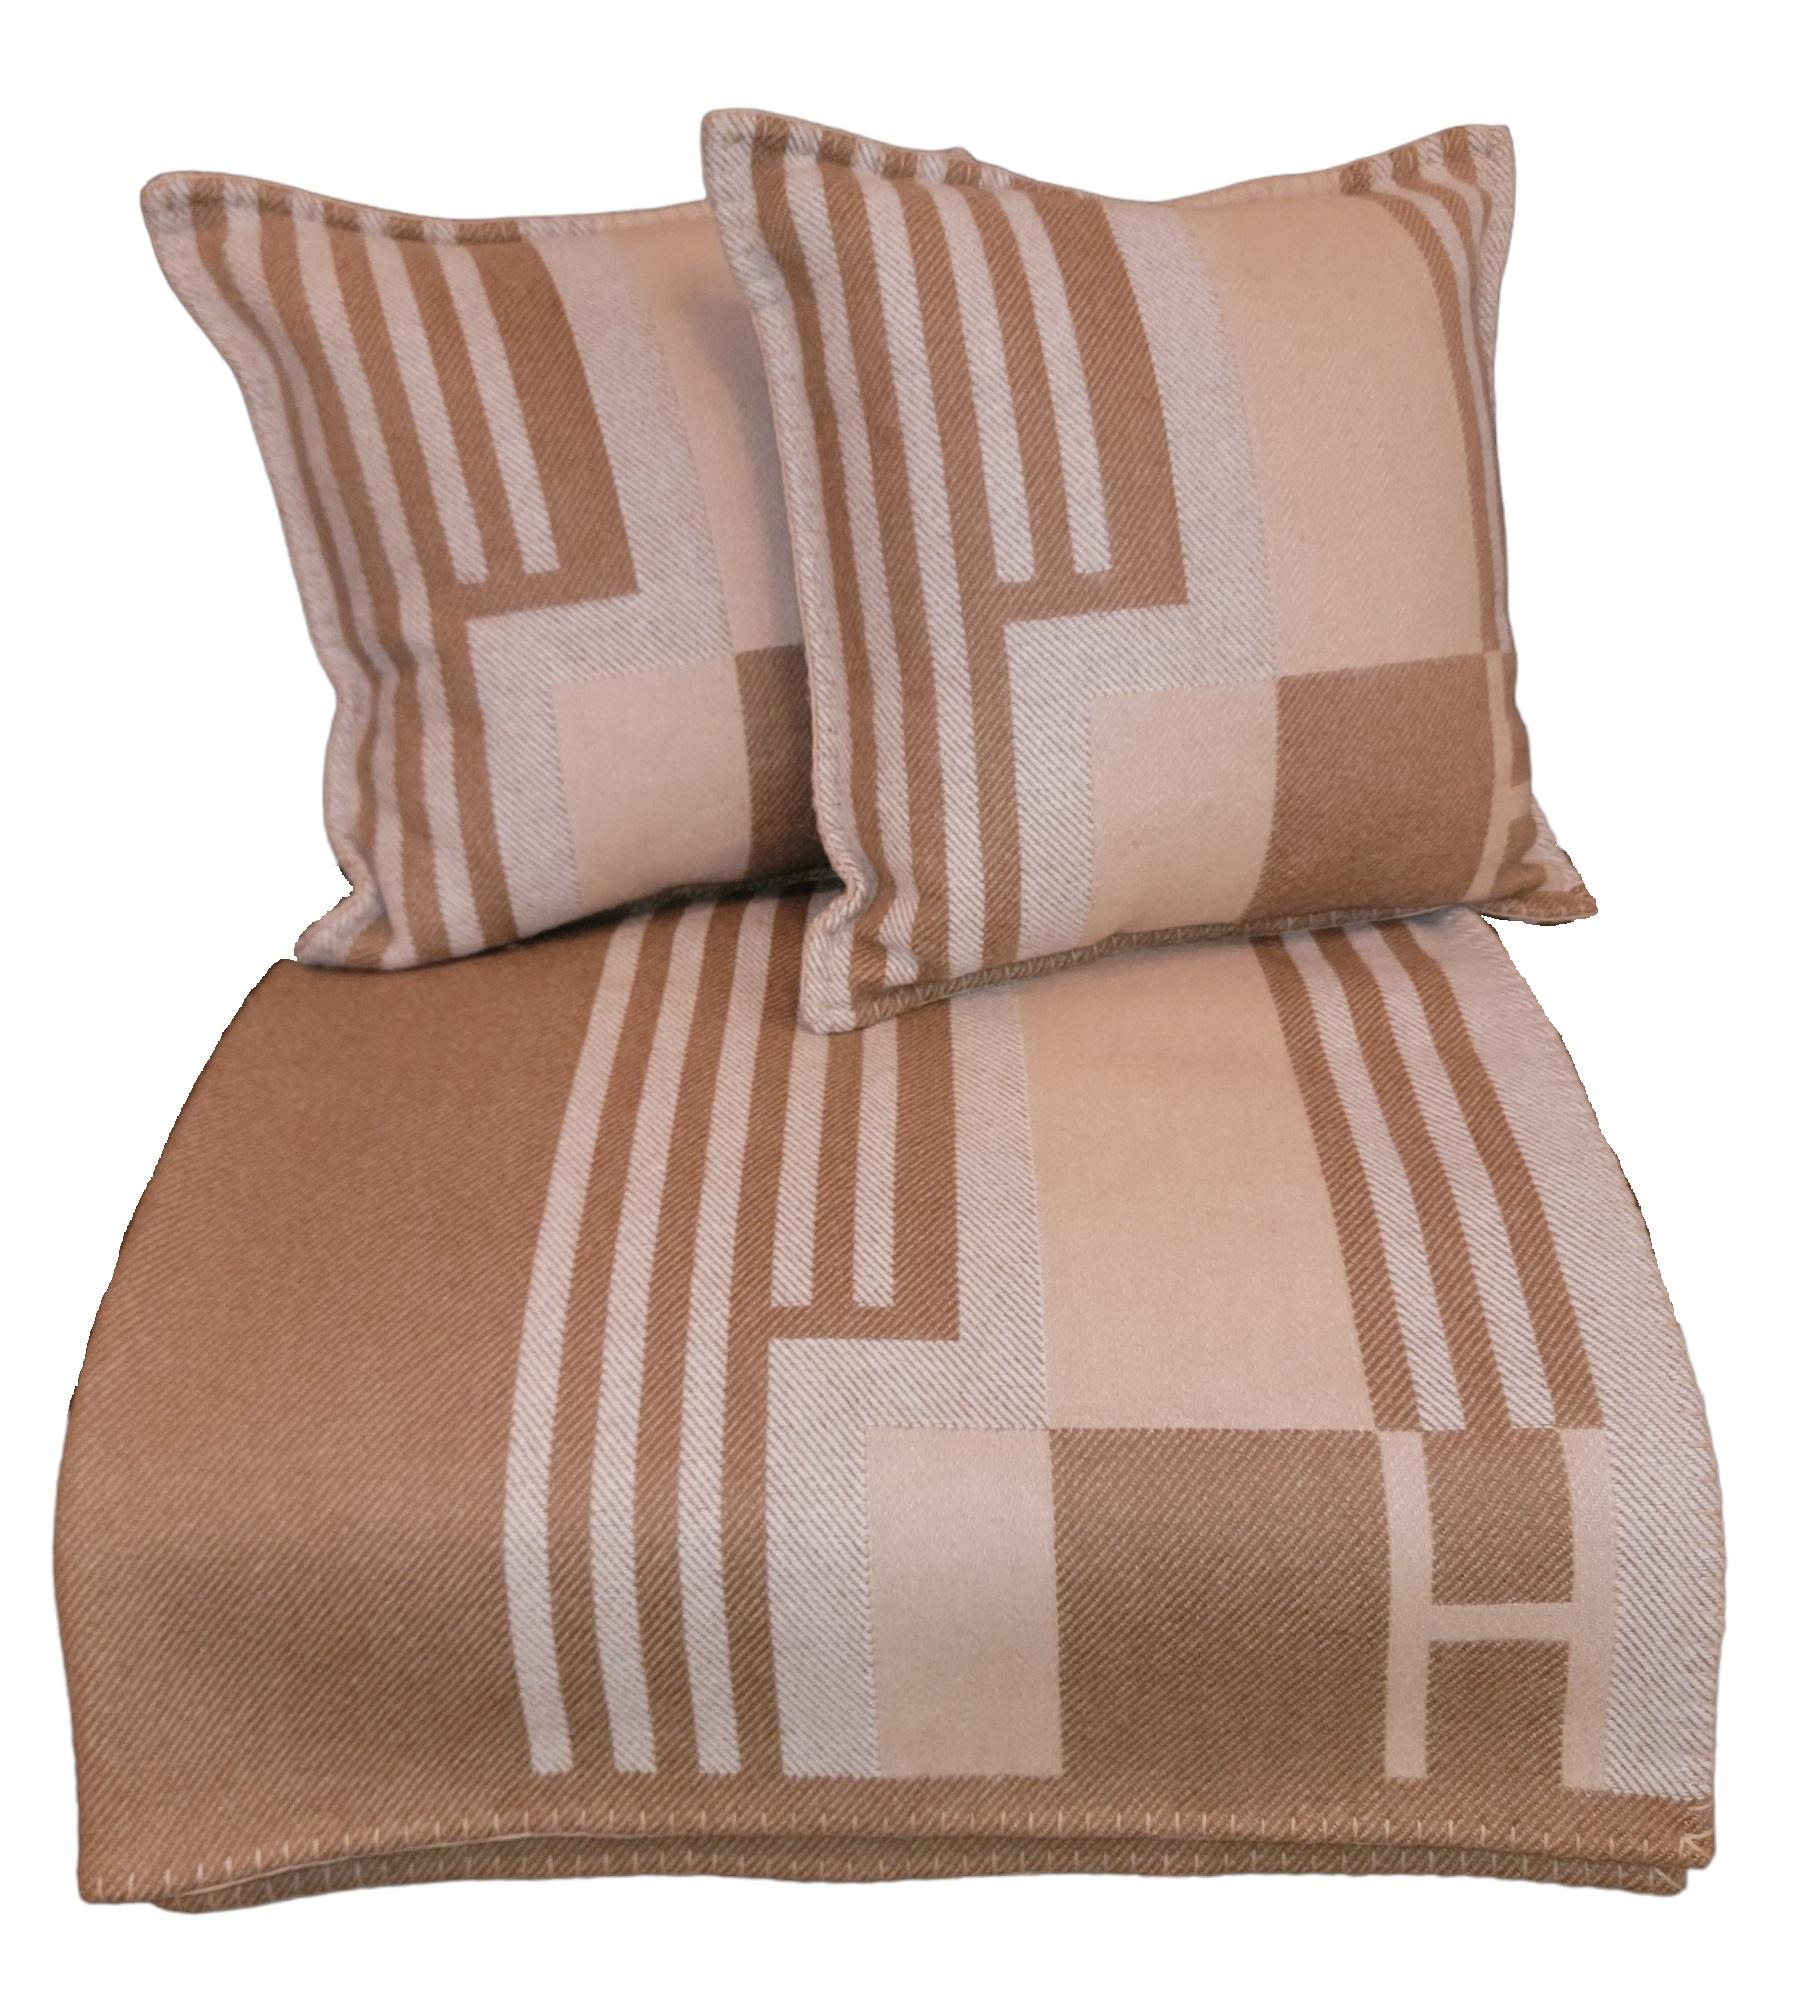 Avalon Vibration Throw  Wool Hermes Blanket and matching pillows that are made in France to be soft and plush while keeping you stylish and warm. May be used as a throw over a sofa or as a bed spread. Wonderful design. 
Blanket measures roughly 55 x